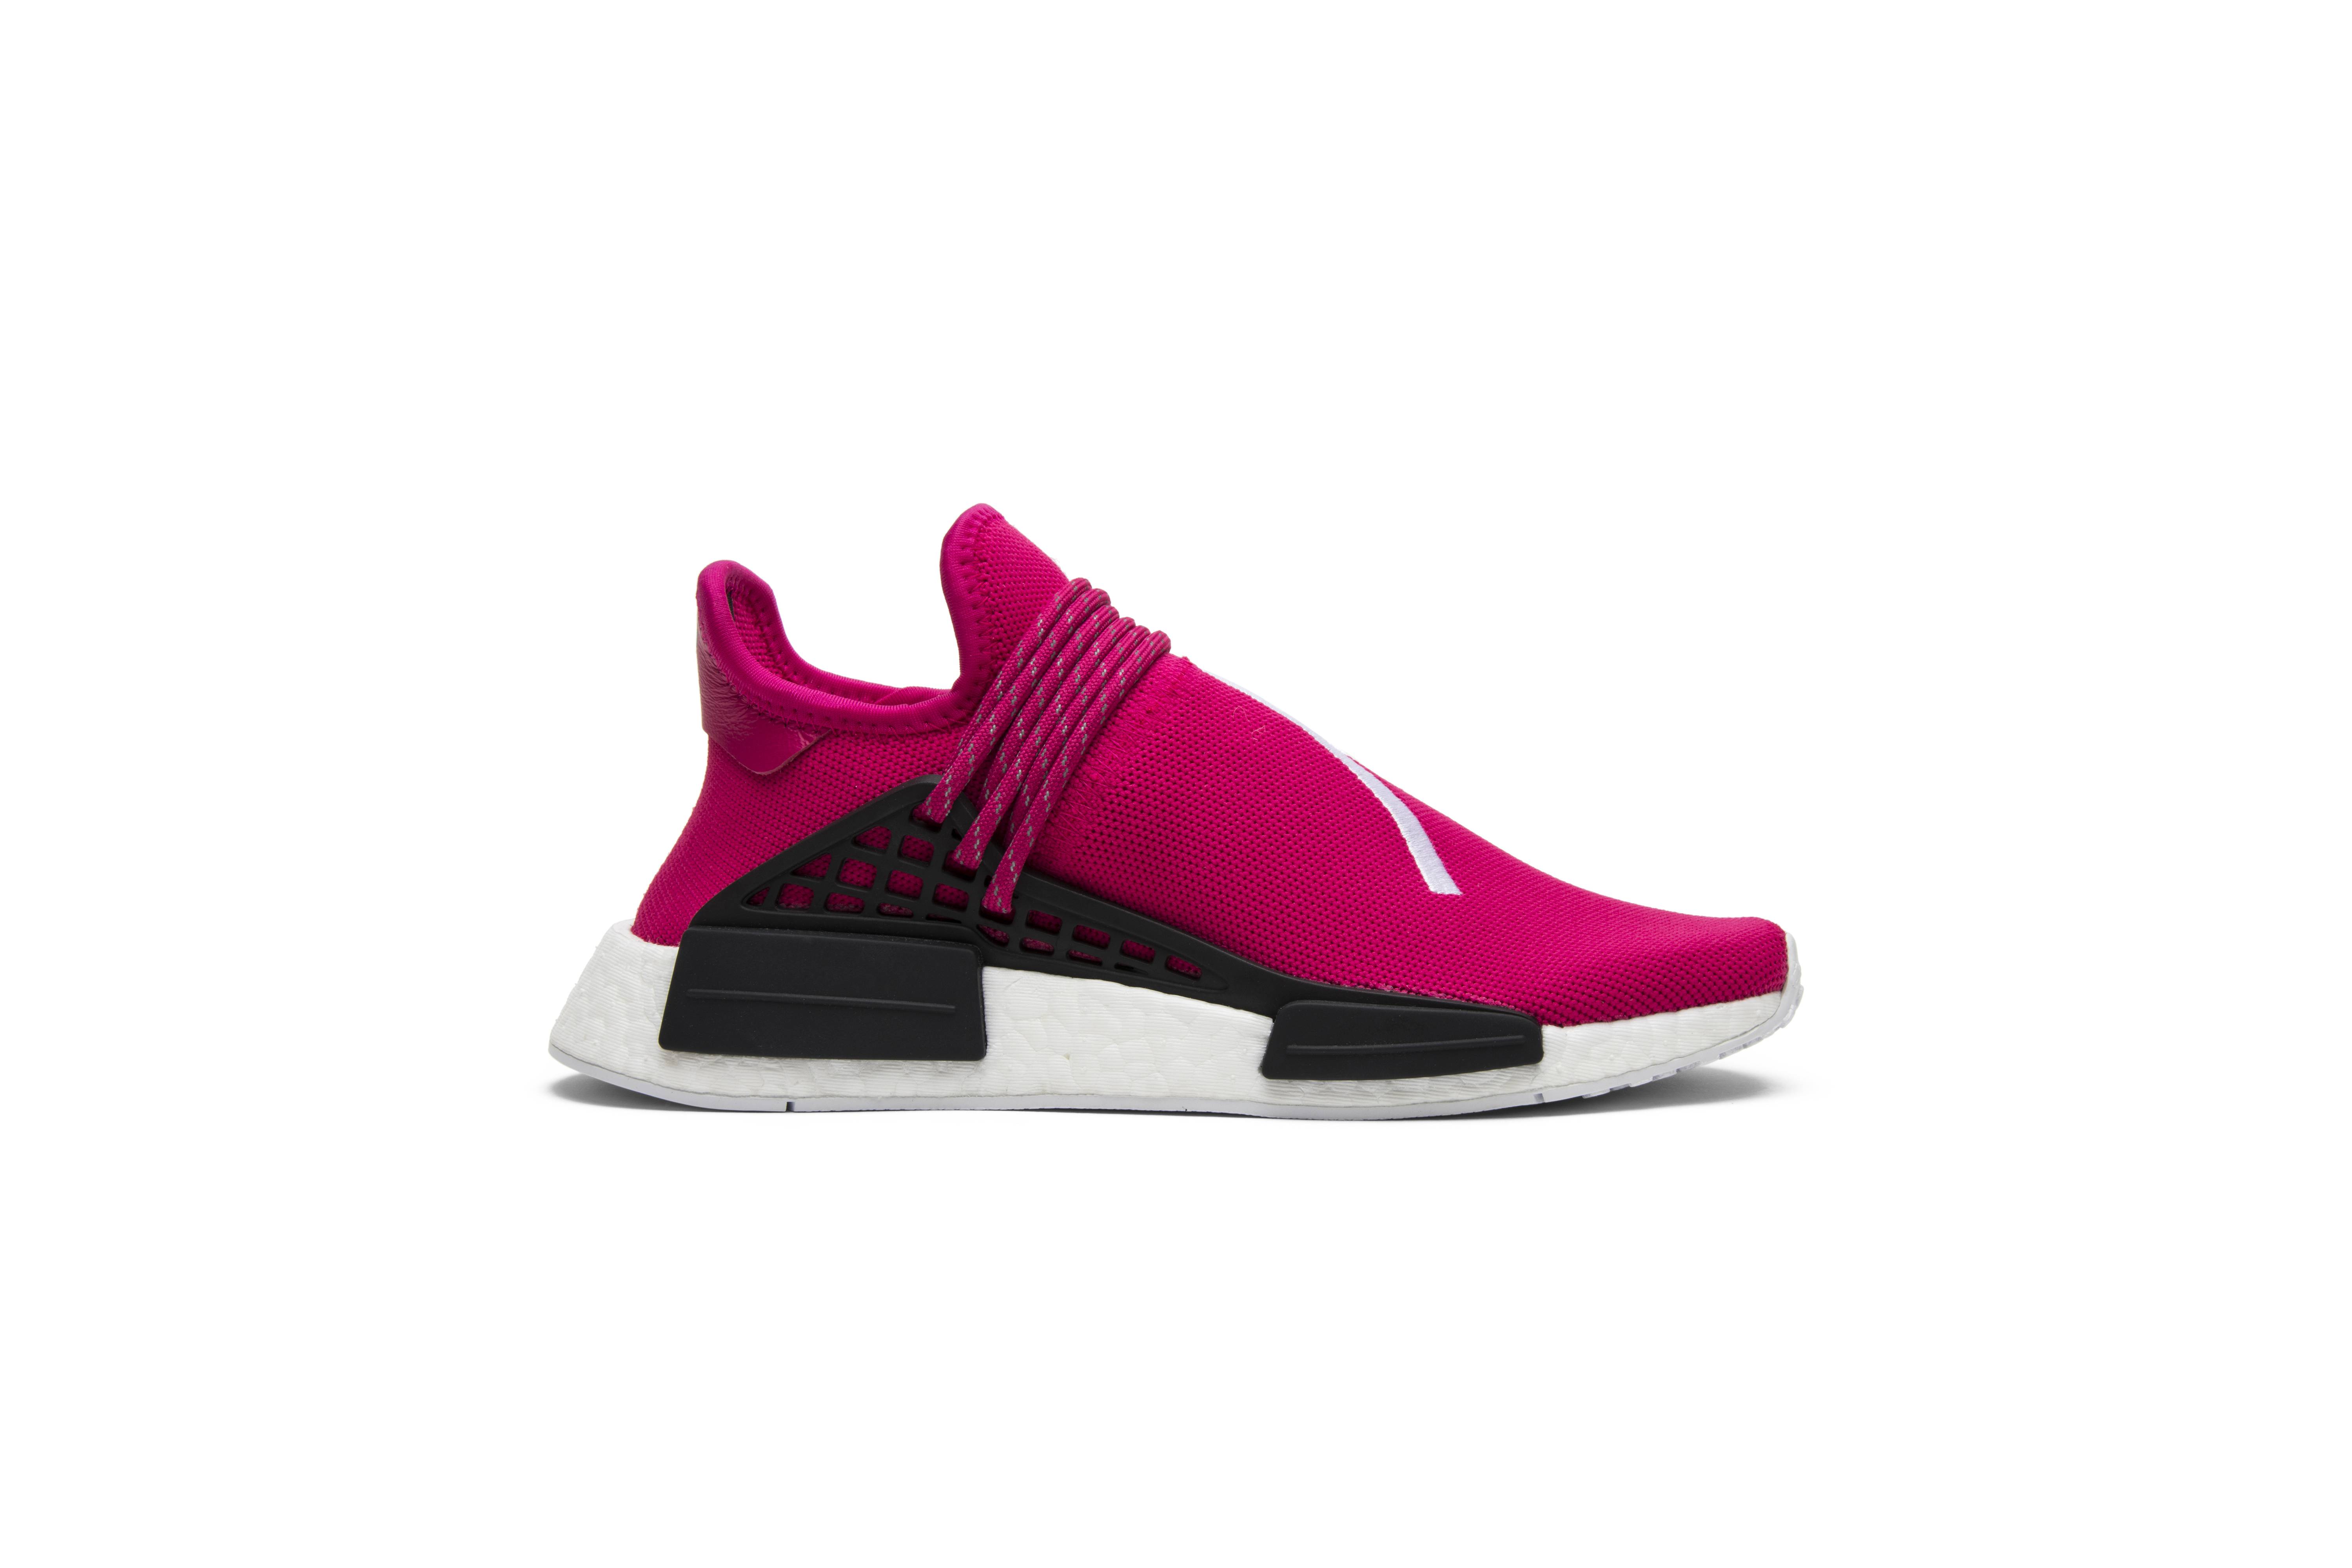 adidas nmd hu pharrell friends and family pink